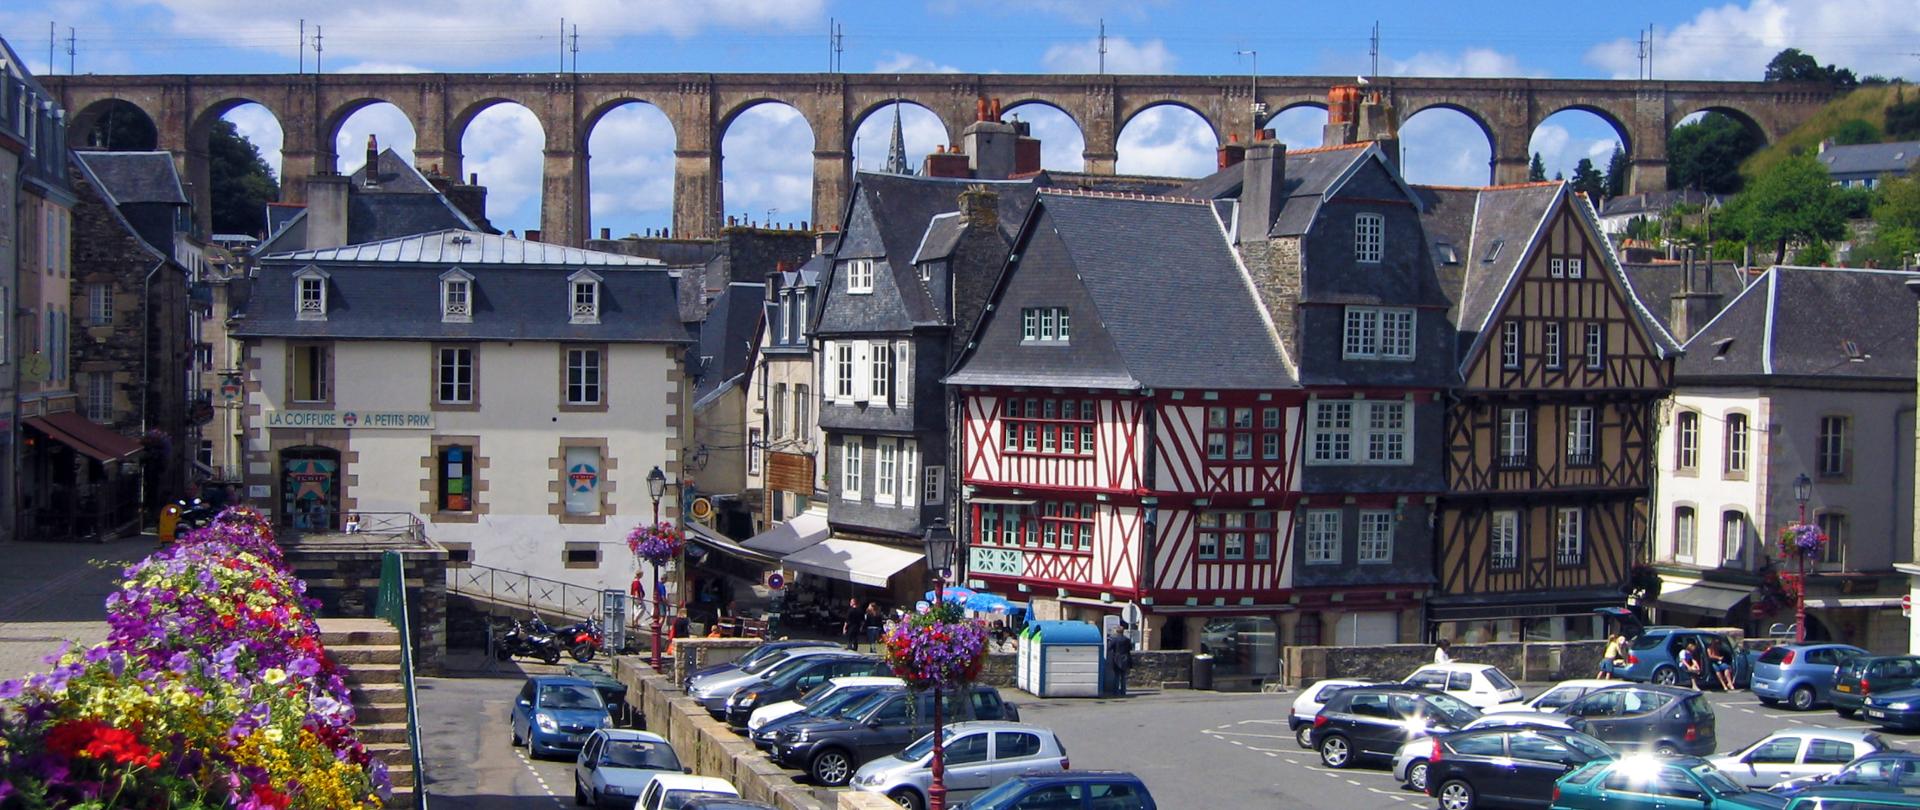 View of Morlaix, with the viaduct and old houses